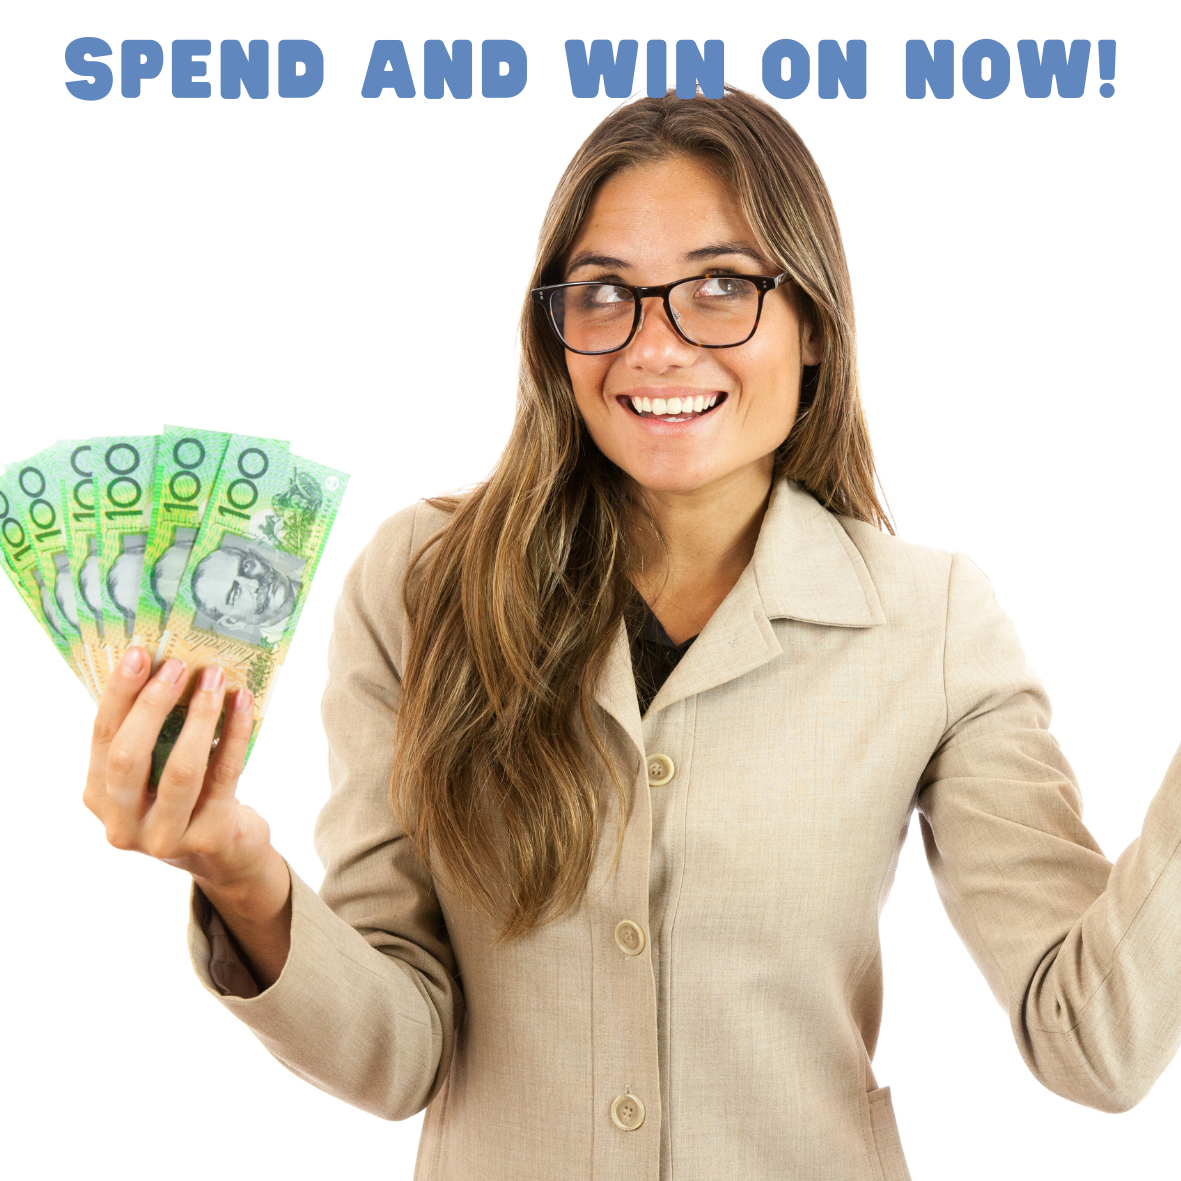 Community Pharmacy Online Spend and win